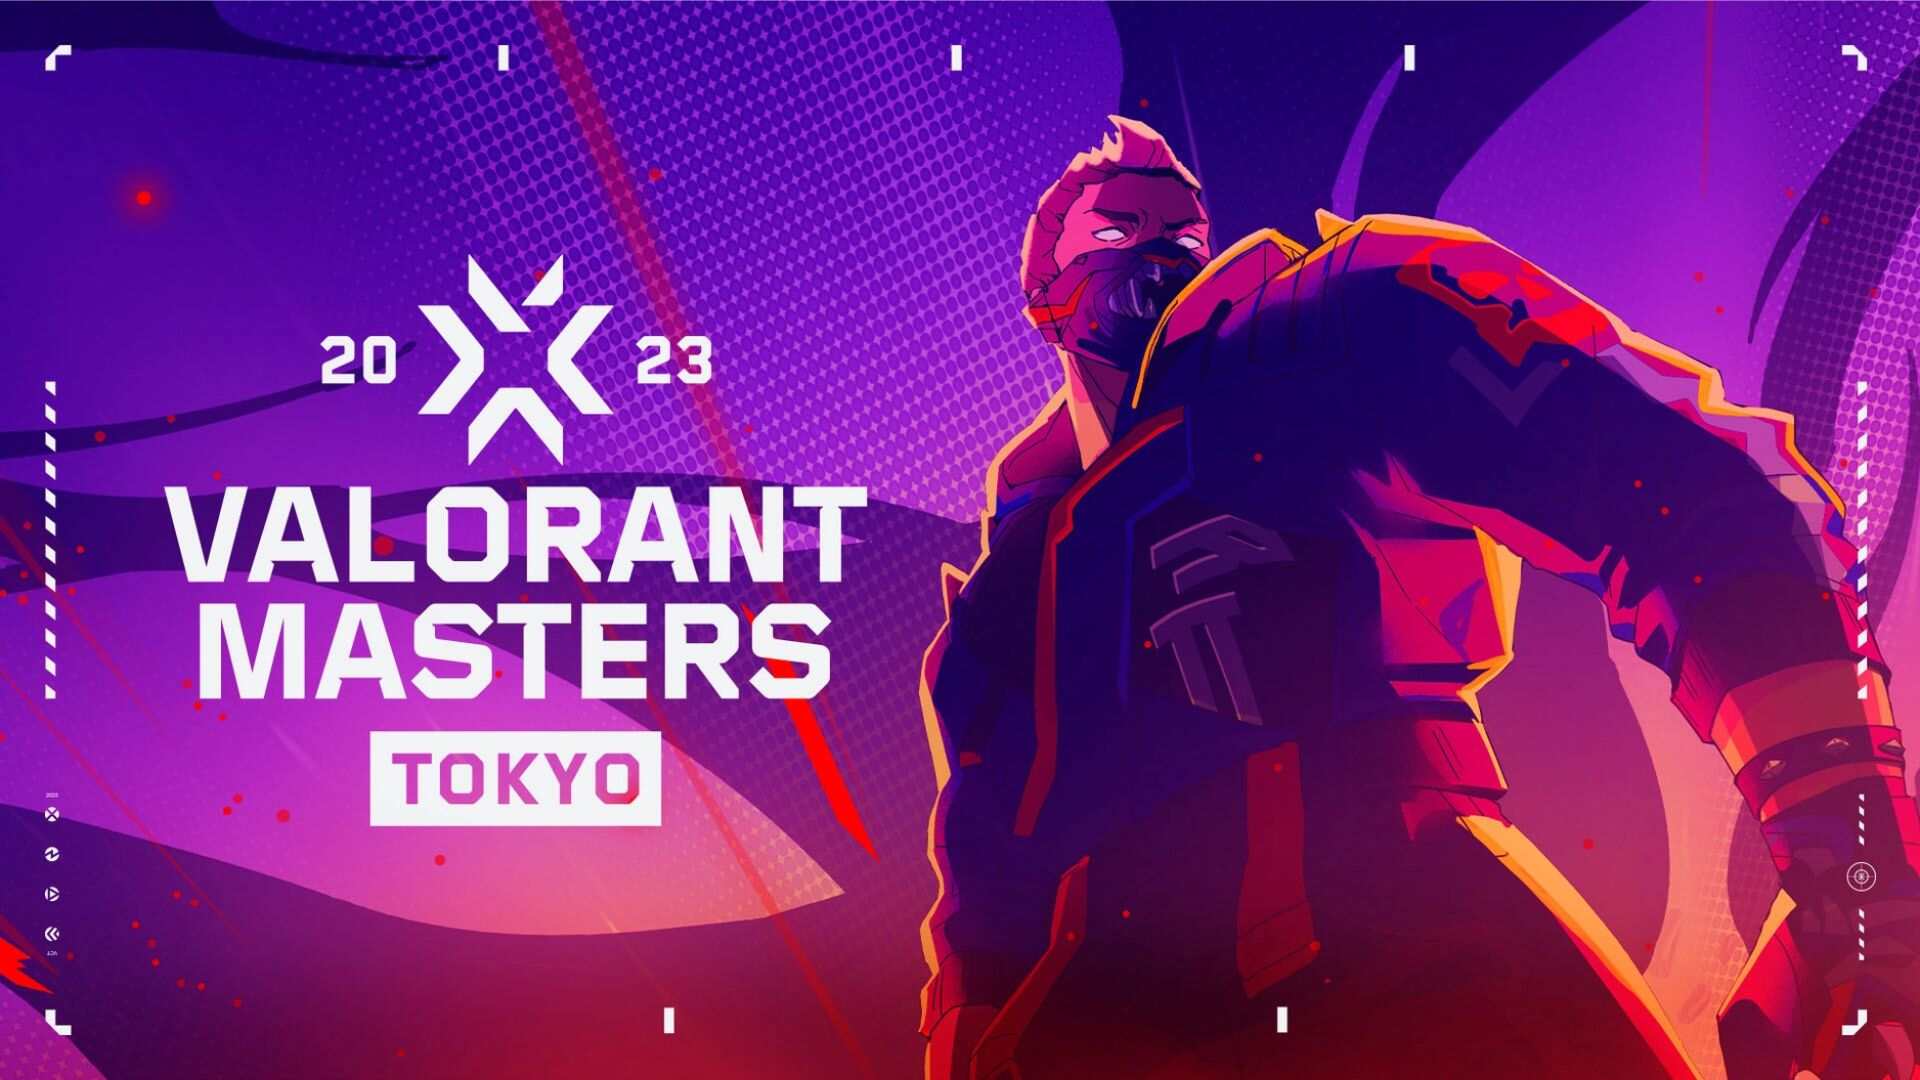 What it takes to obtain the VALORANT Masters Tokyo player card and